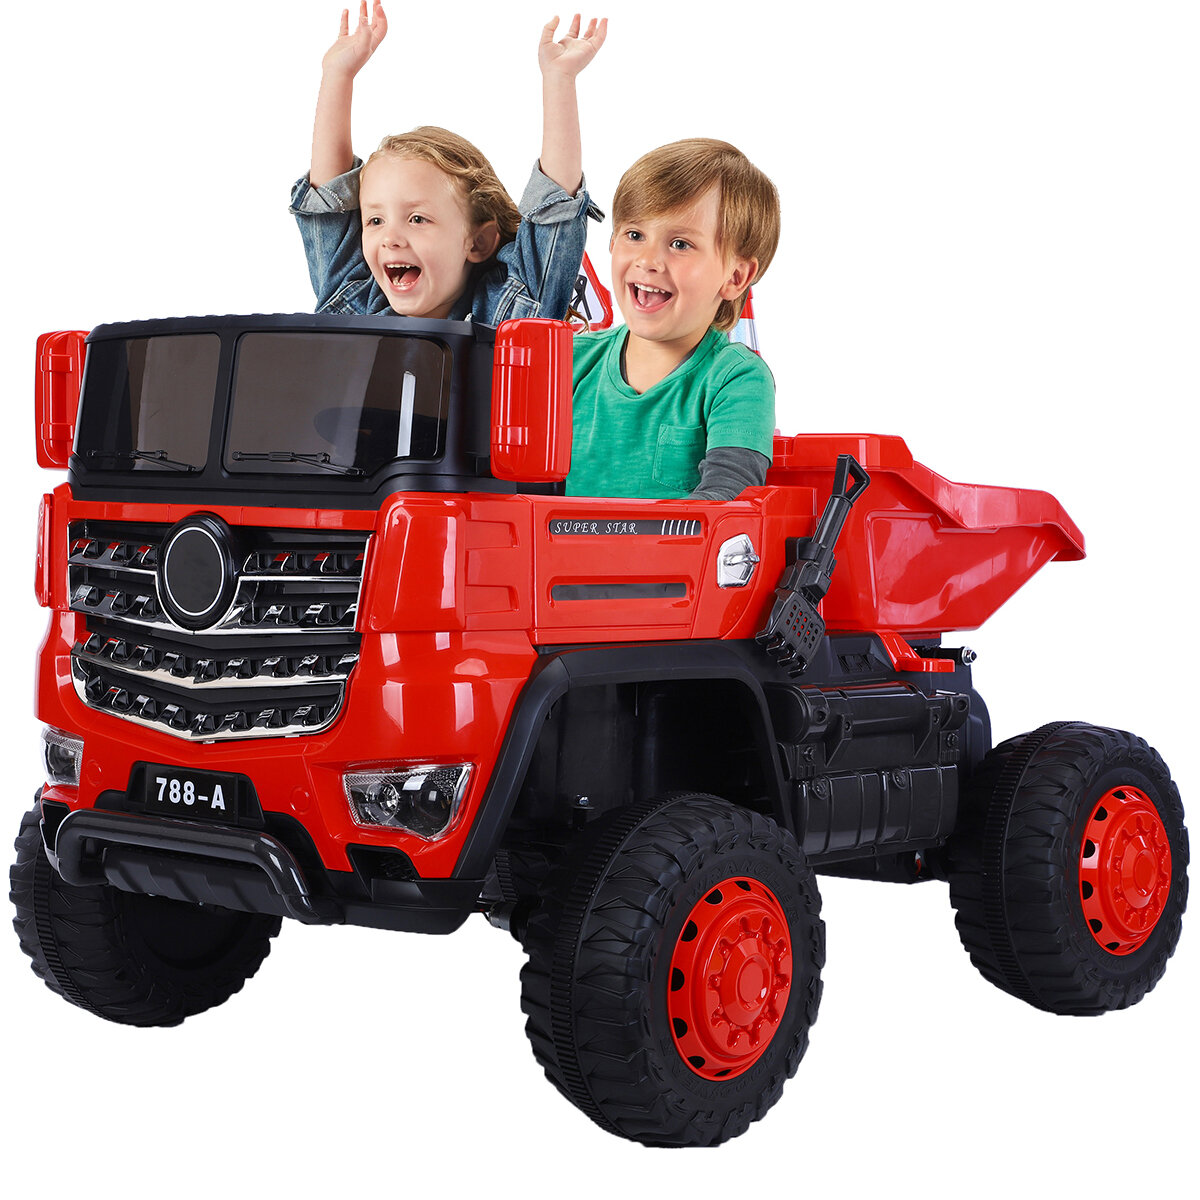 

788-A 4WD 2 Seater Ride On for Kids Electric Car390 Motor Plus 12.10 Battery Powered Four-wheel Drive Engineering Vehi